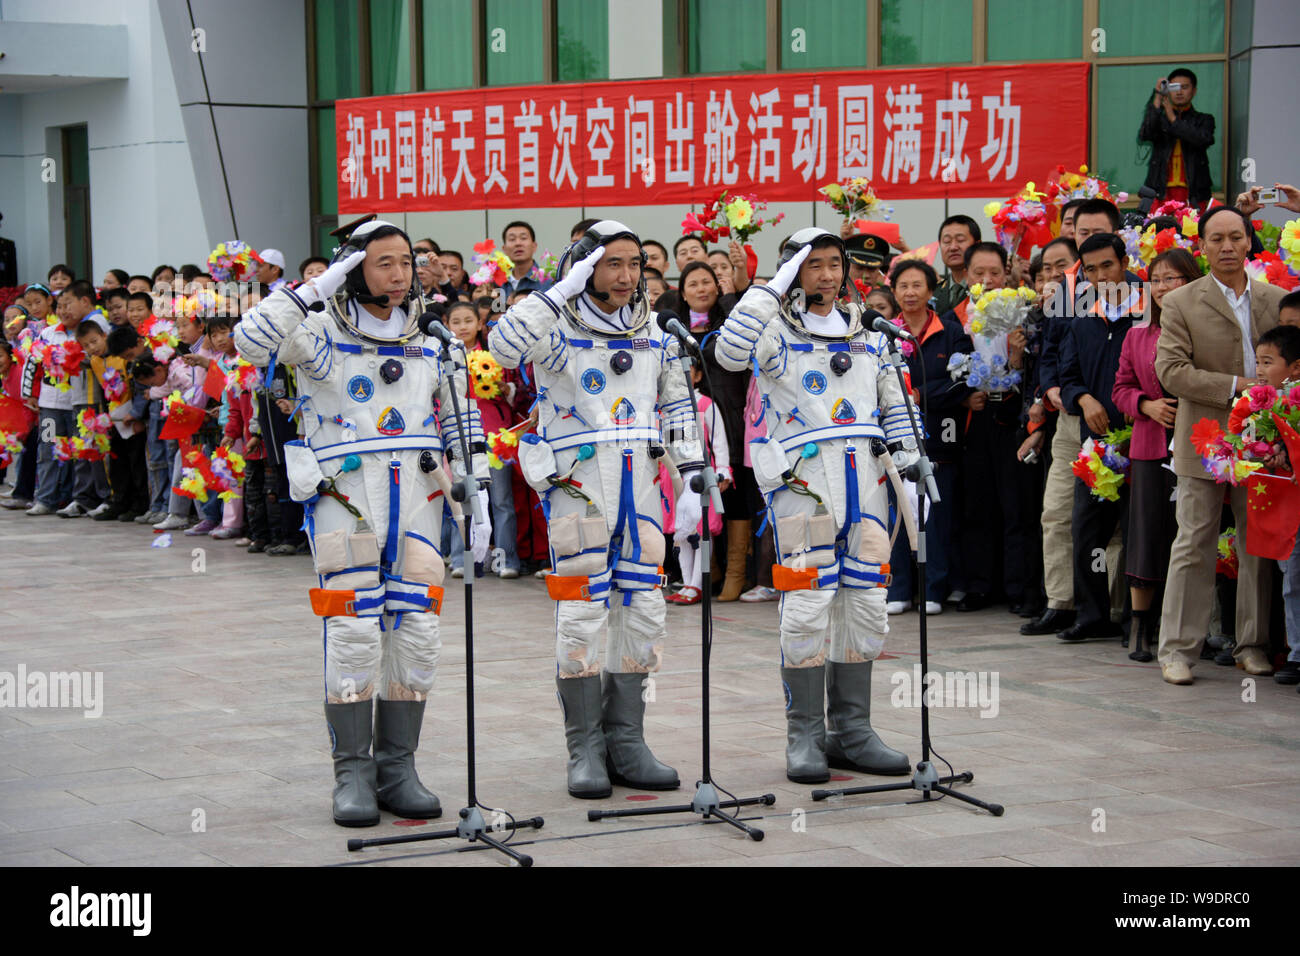 (From L) Chinese taikonauts Jing Haipeng, Zhai Zhigang and Liu Boming, salute during a ceremony before entering the capsule of Shenzhou VI manned spac Stock Photo